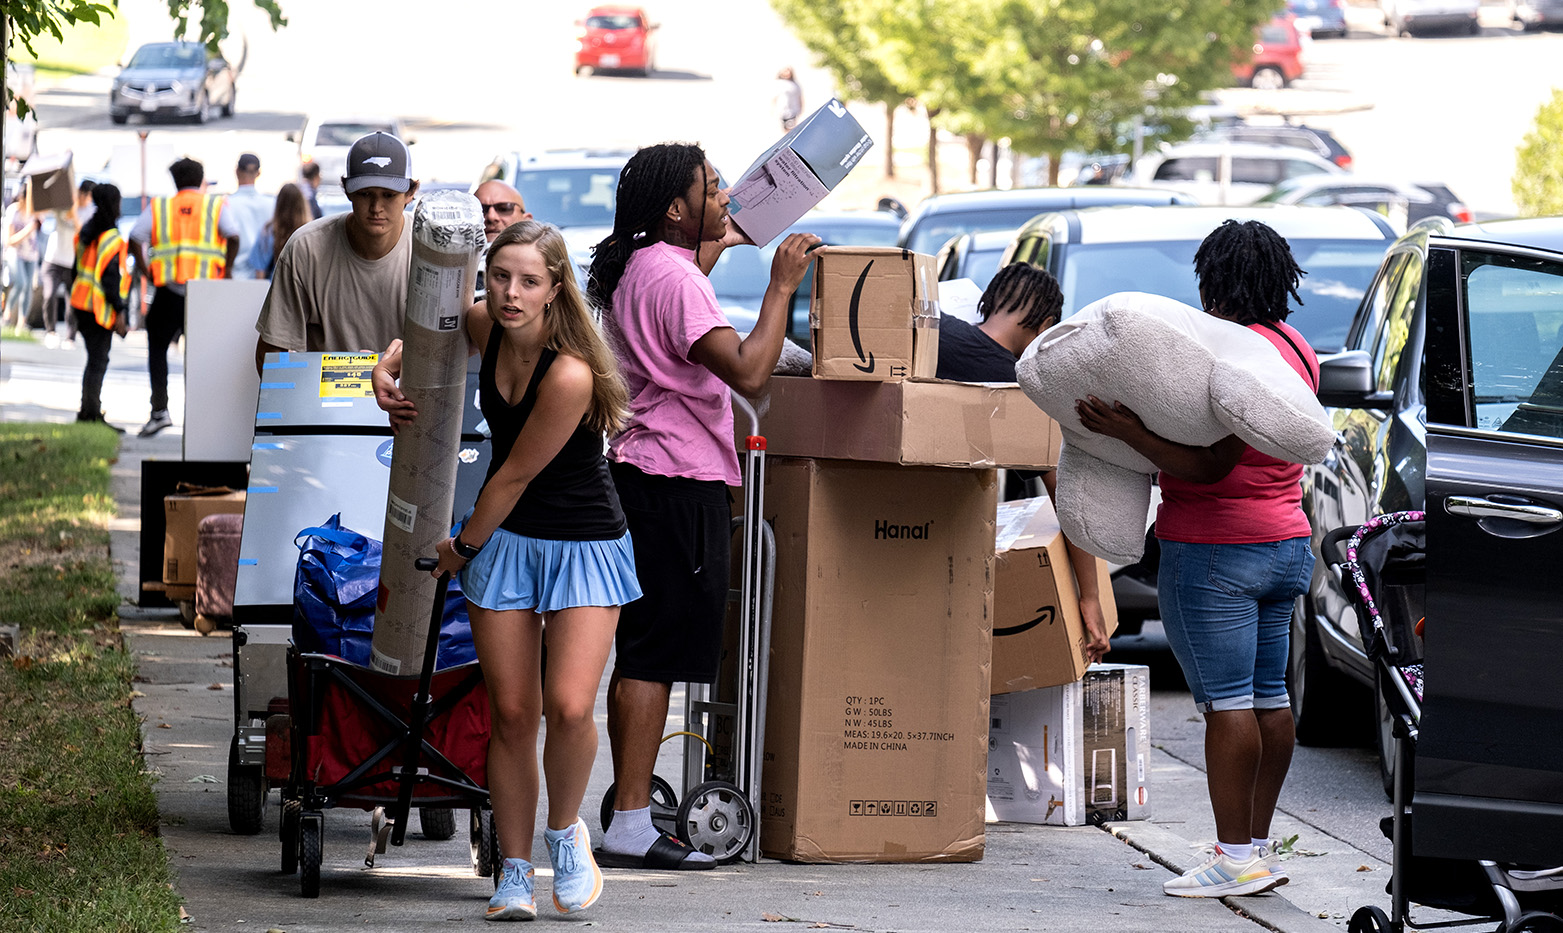 Students collecting items from cars and transporting move-in materials on a sidewalk.